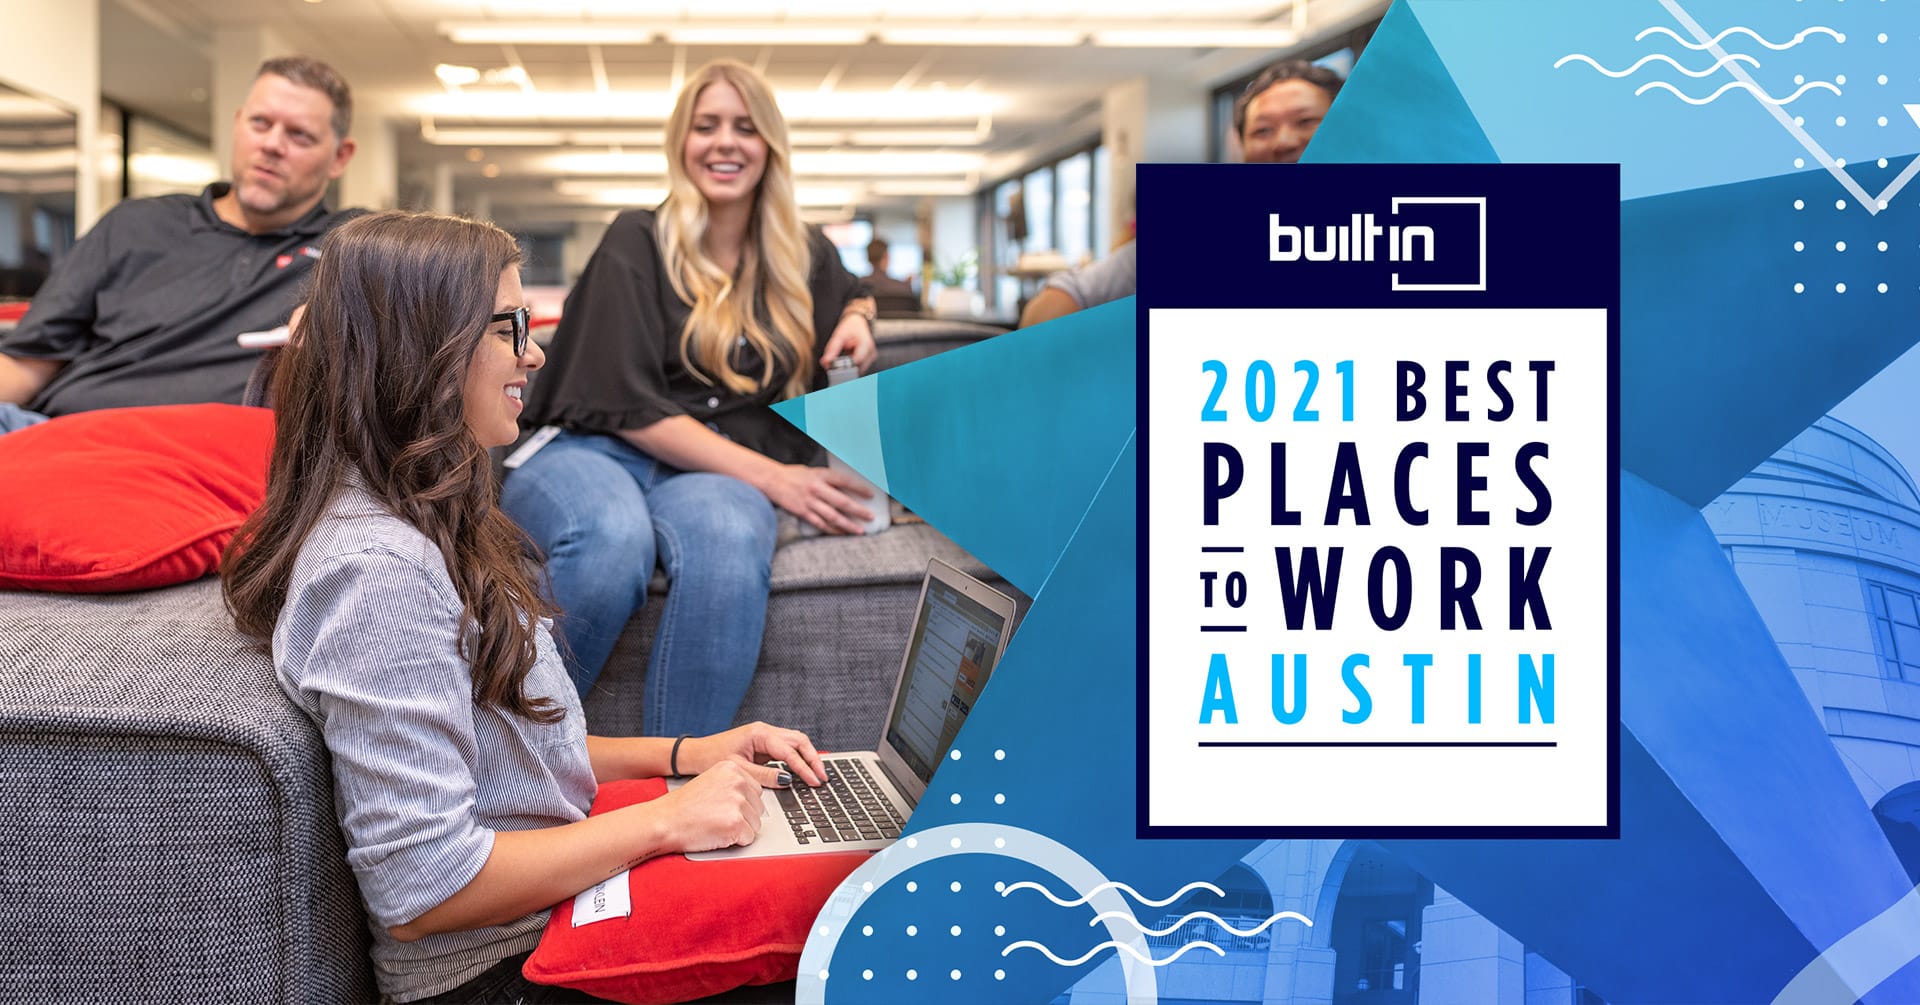 AlertMedia Again Named One of Austin’s Best Places to Work